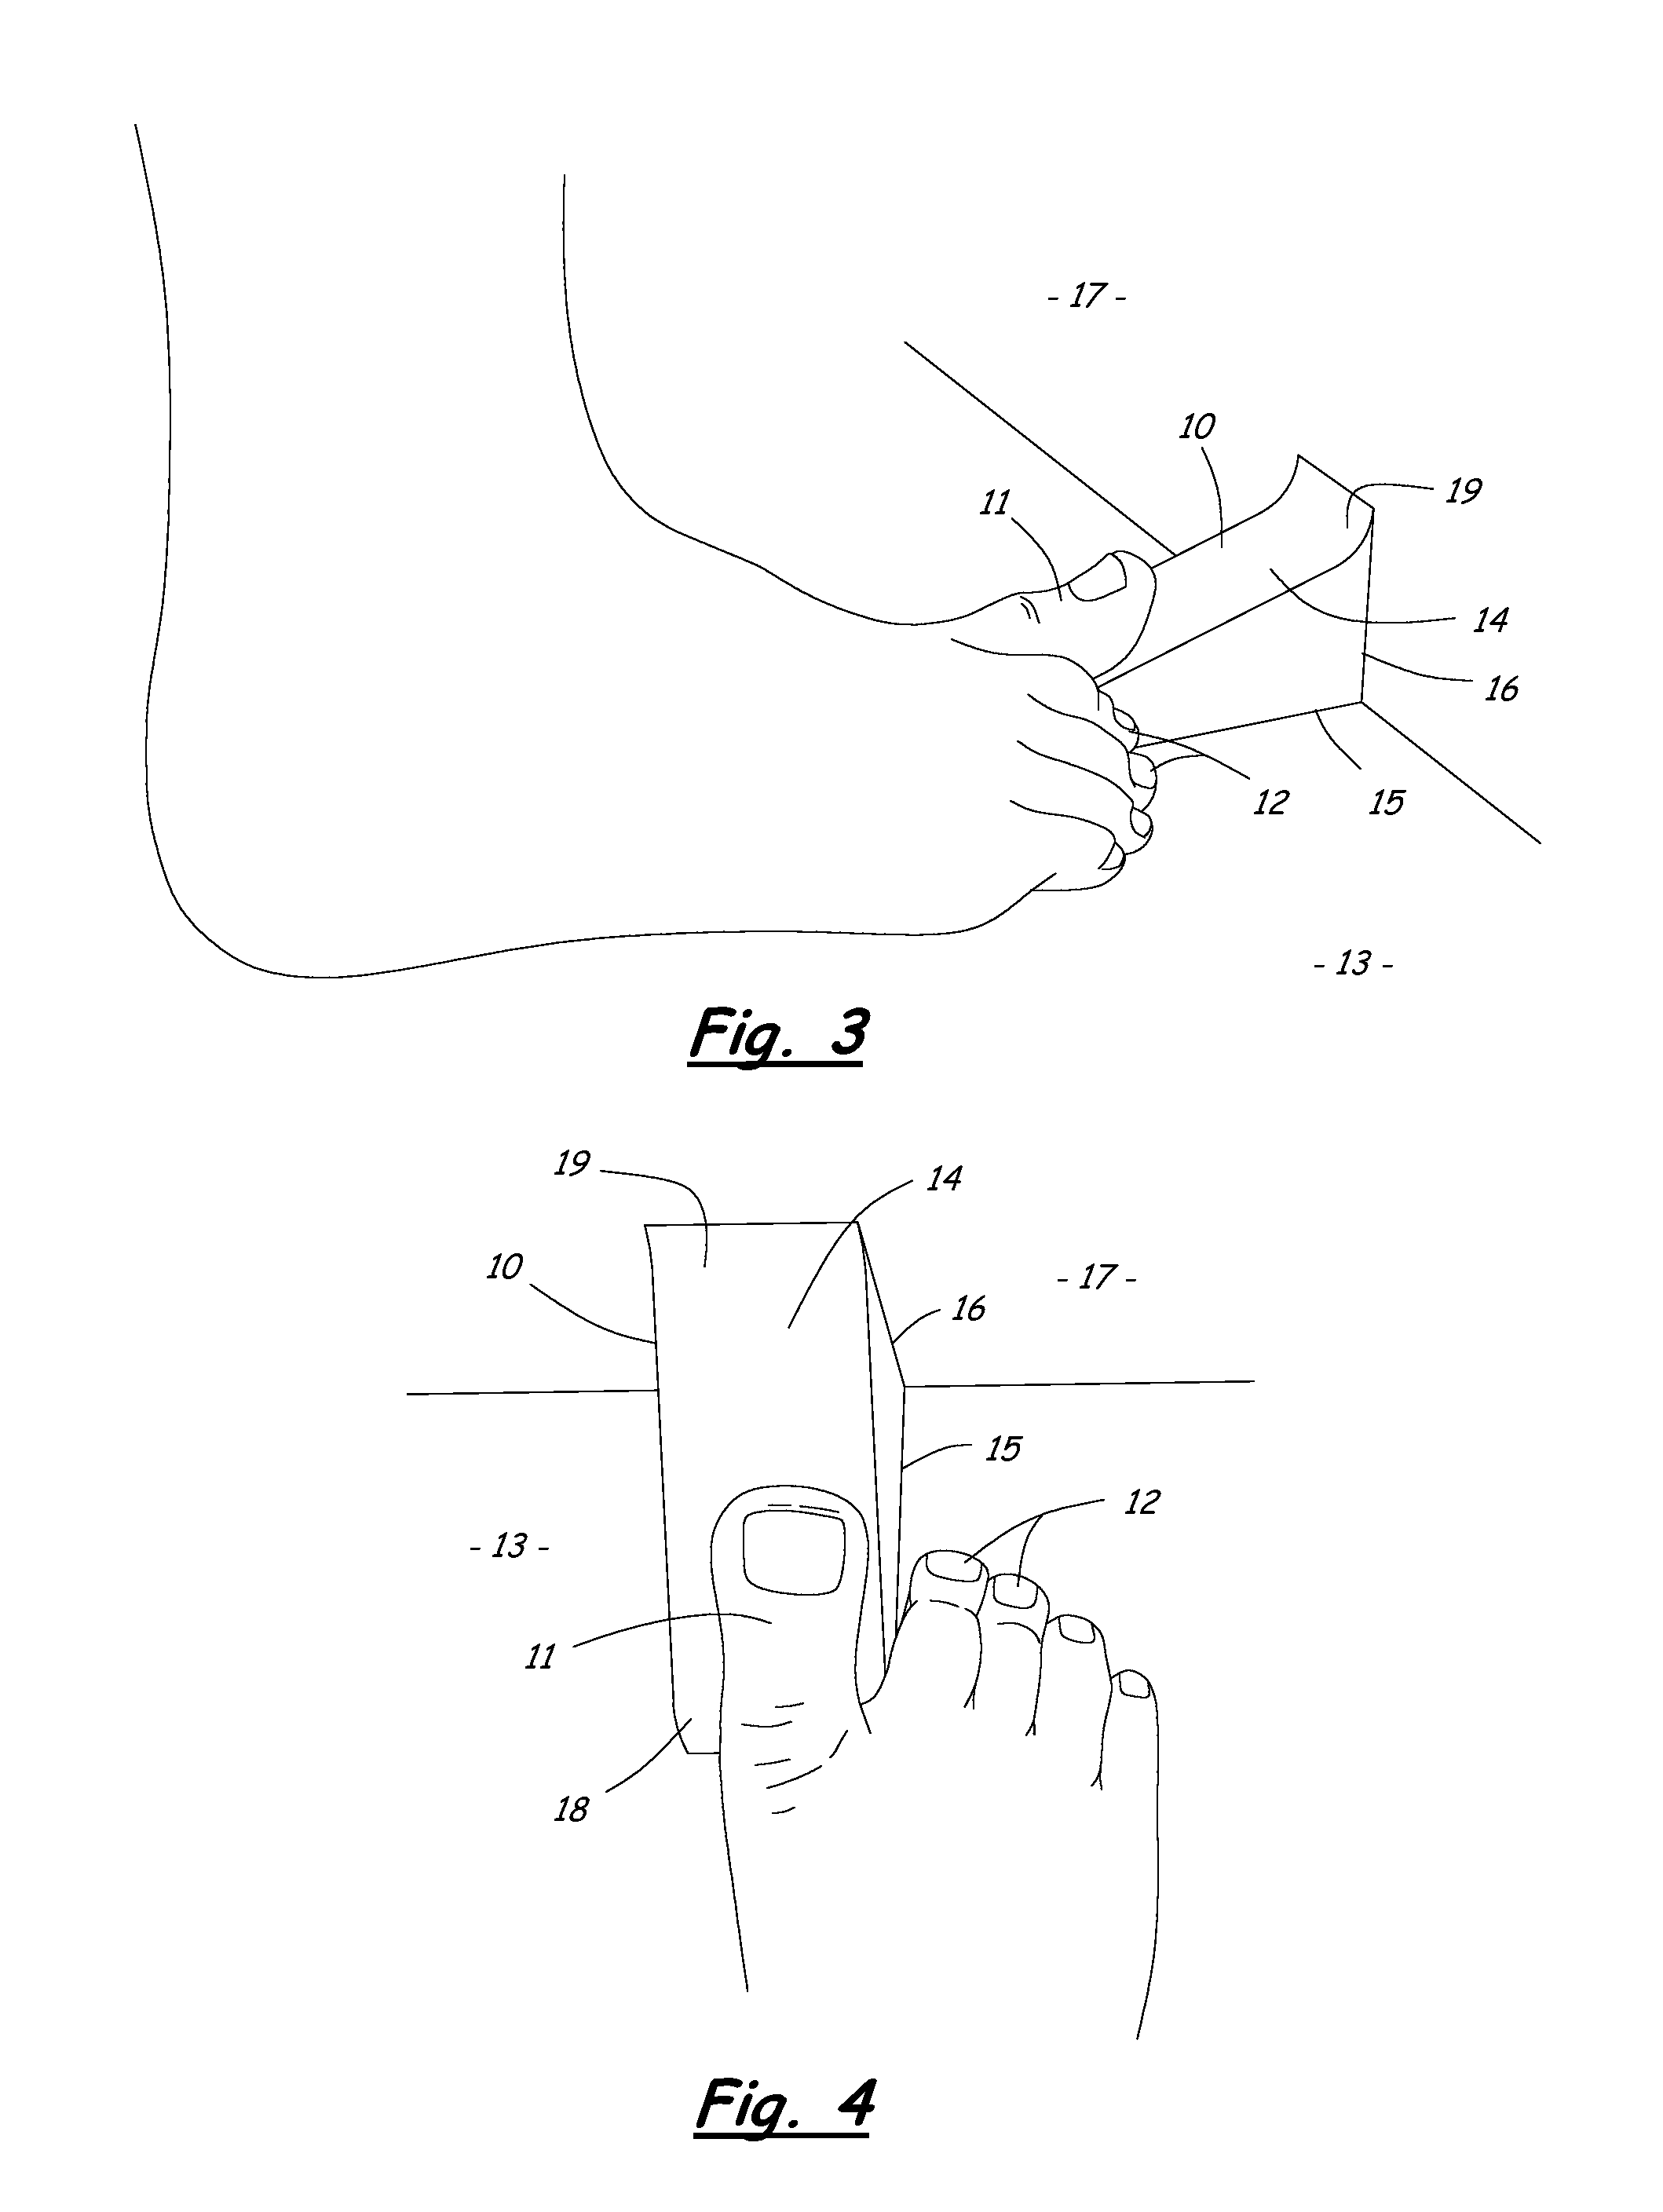 Method and apparatus for treating plantar fasciitis